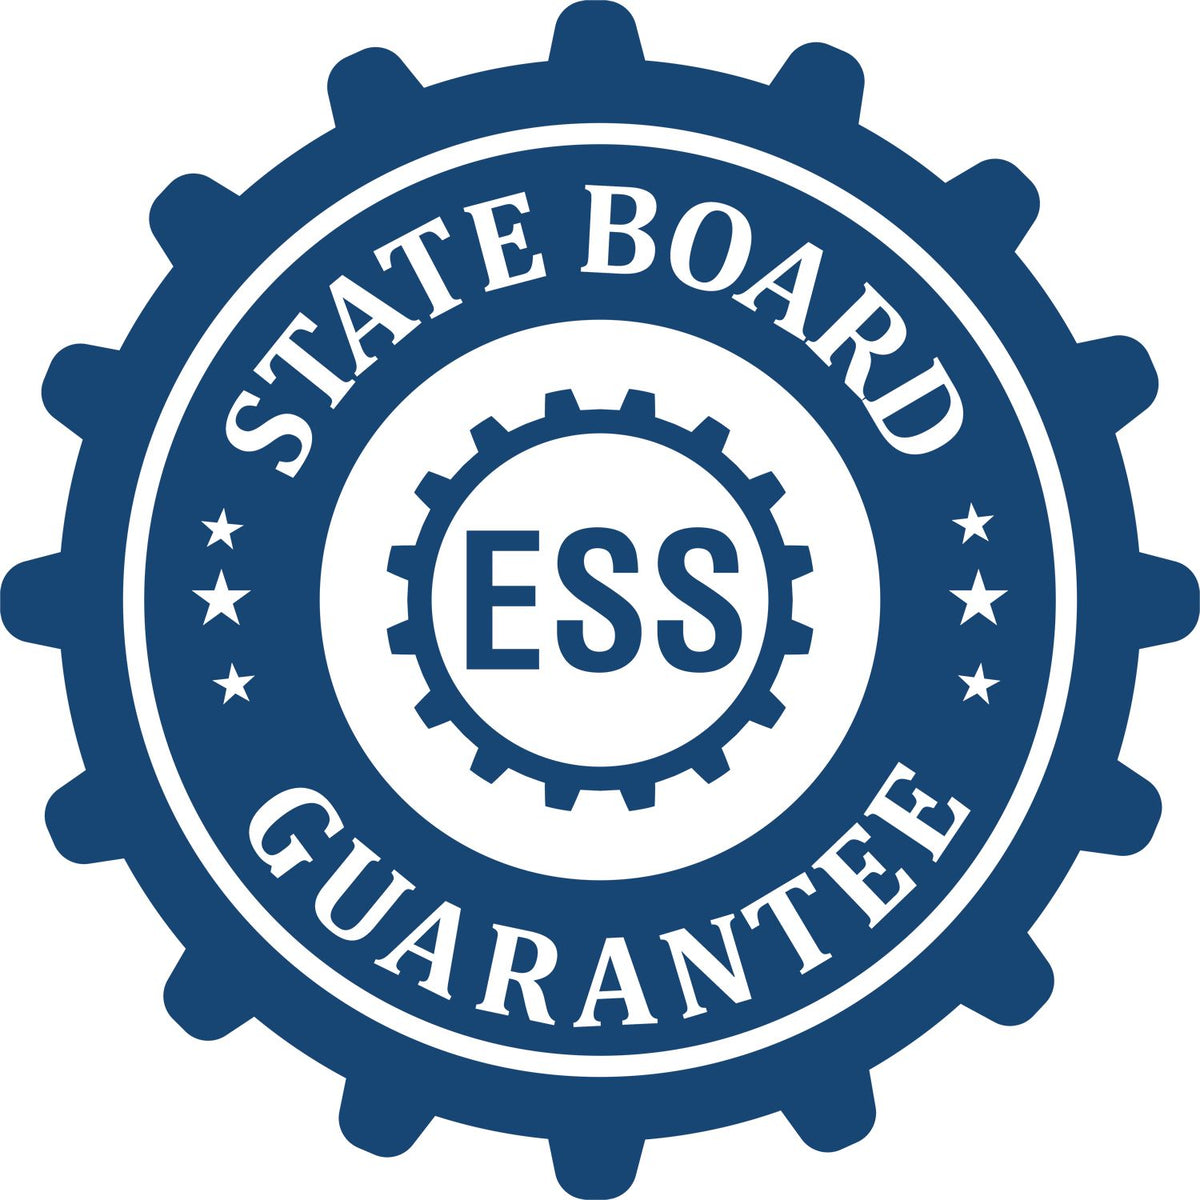 An emblem in a gear shape illustrating a state board guarantee for the Heavy-Duty Washington Rectangular Notary Stamp product.